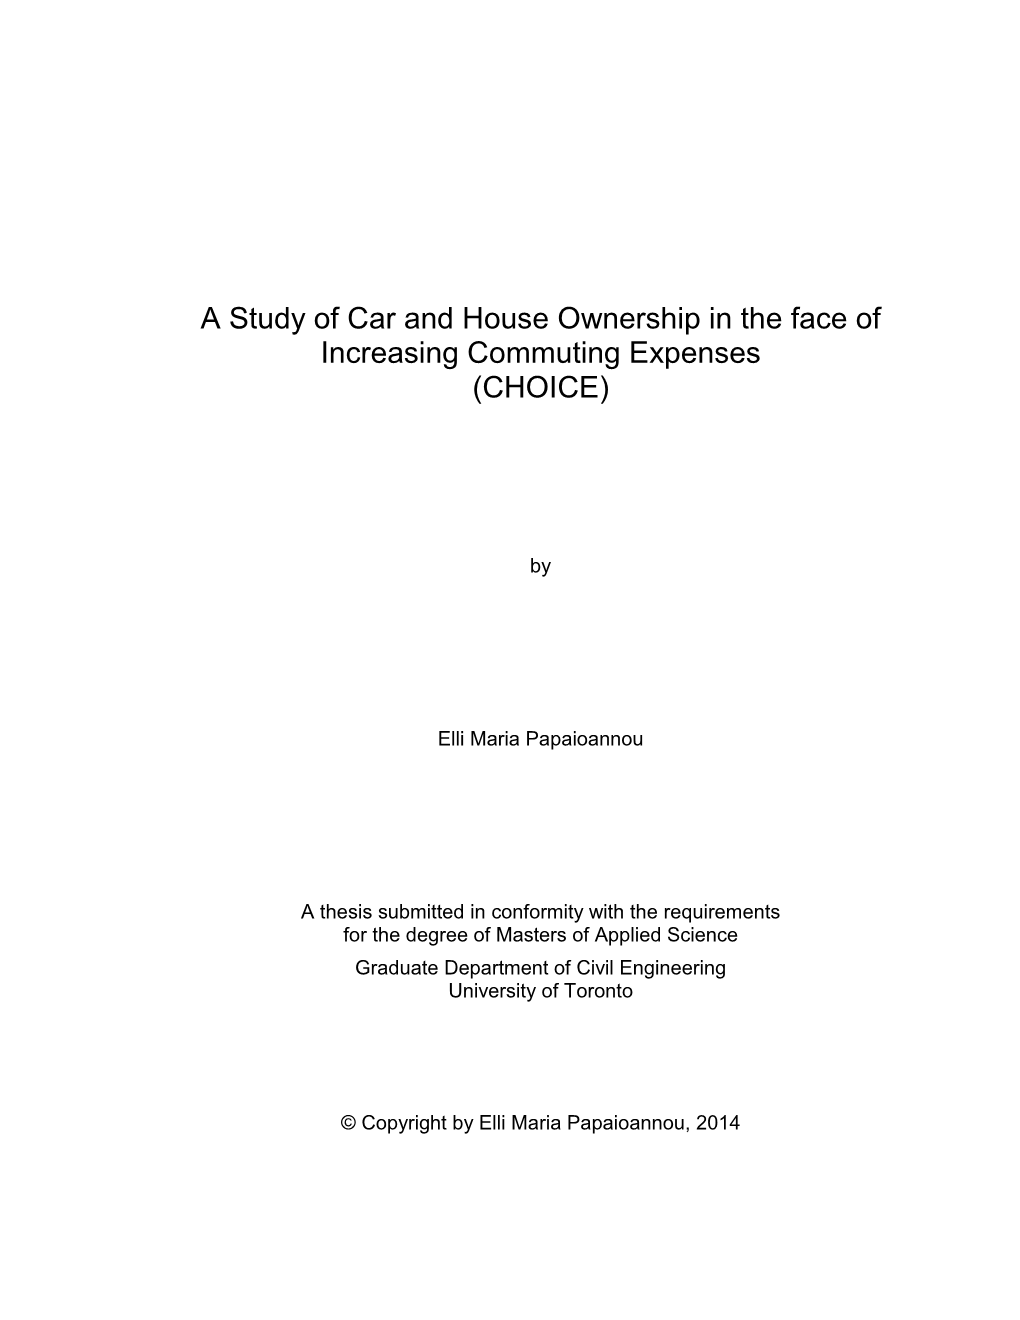 A Study of Car and House Ownership in the Face of Increasing Commuting Expenses (CHOICE)